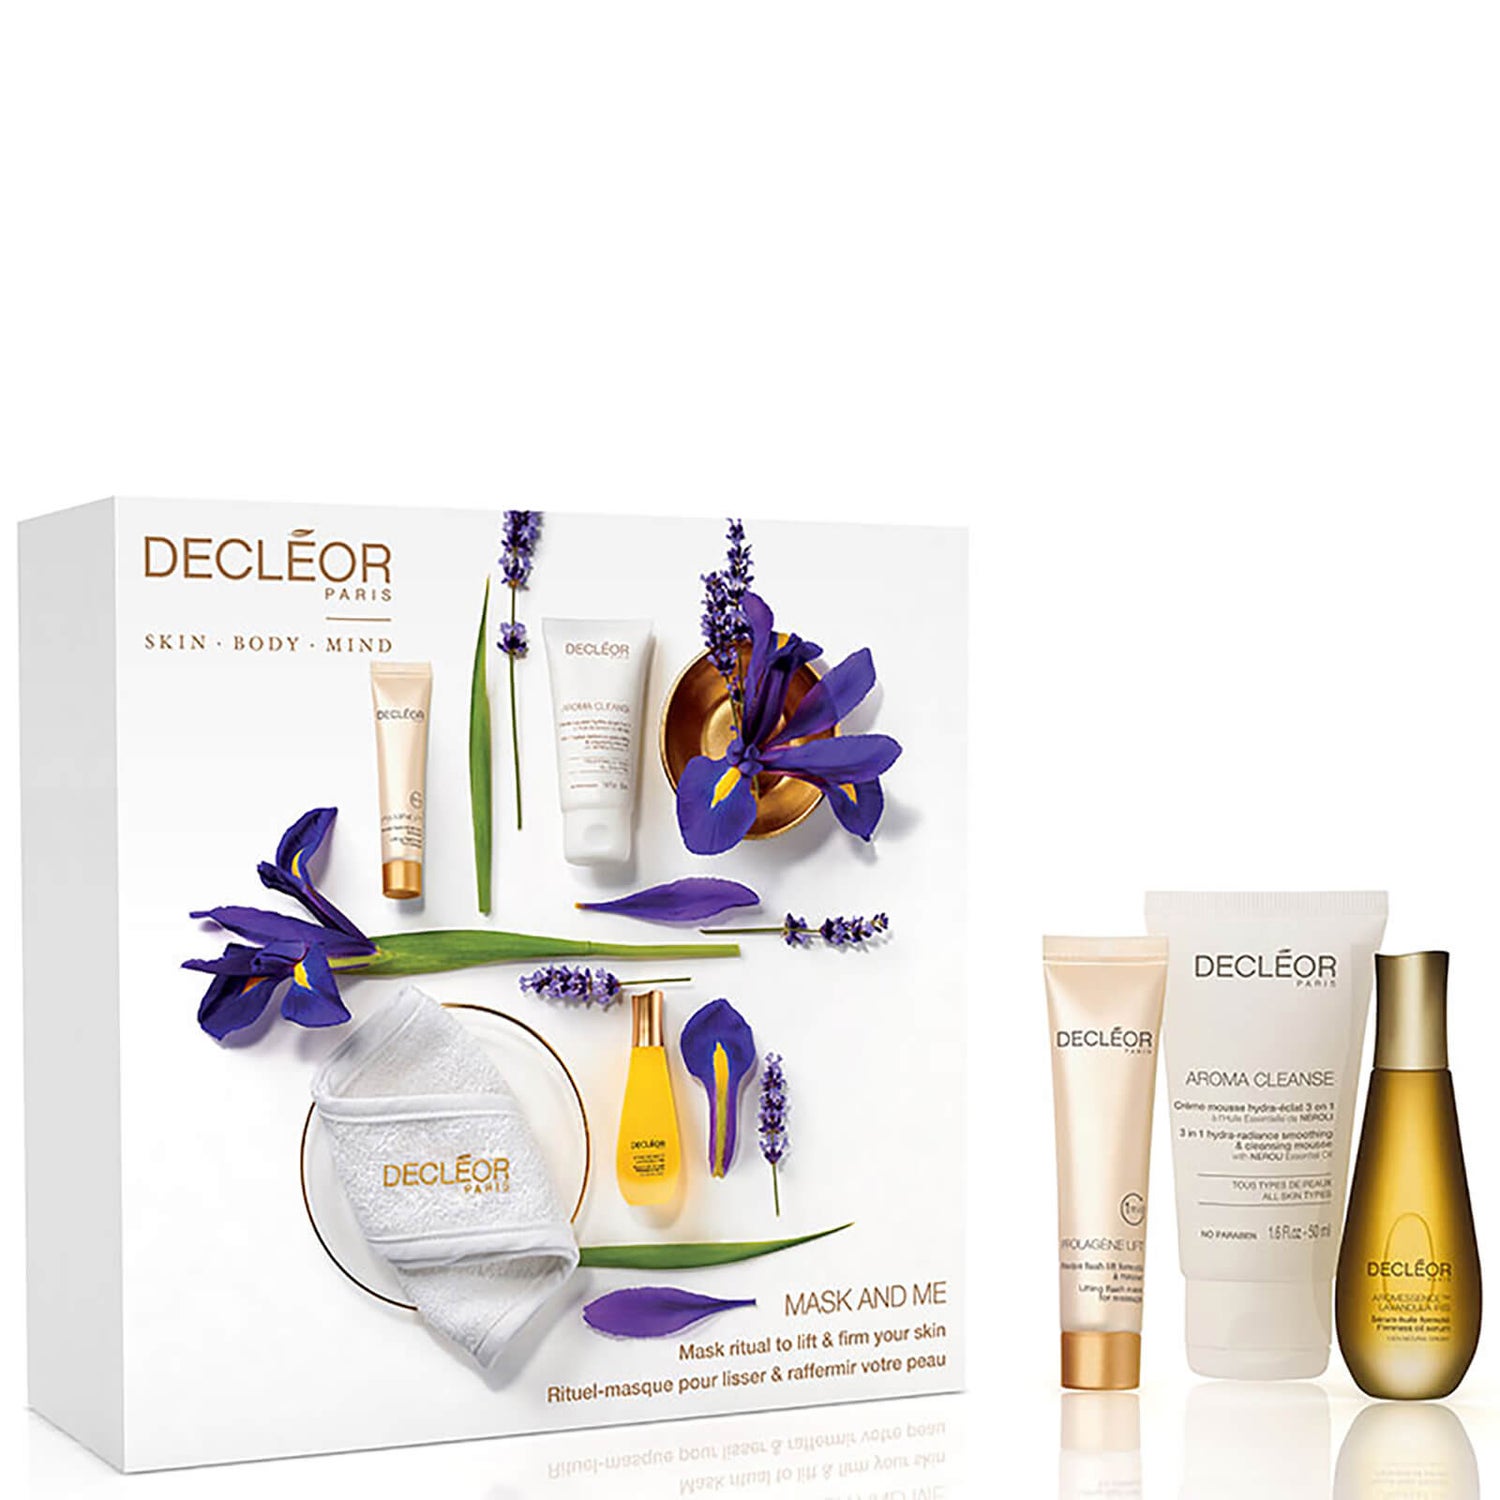 DECLÉOR Anti-Ageing Mask and Me Kit (Worth £83.50)